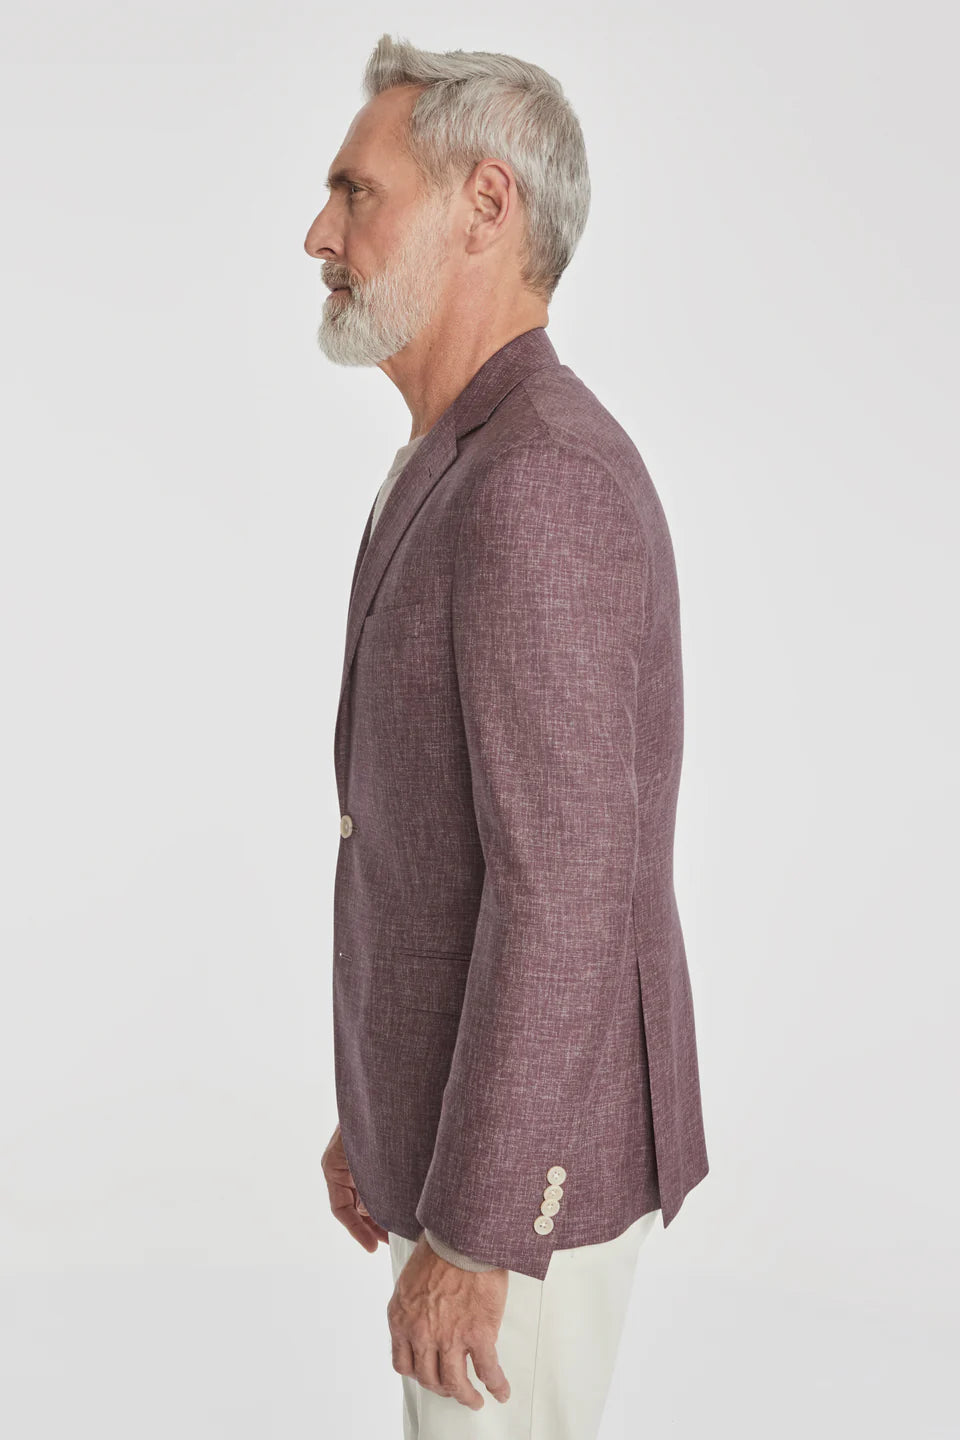 This Midland solid berry blazer is&nbsp;crafted from supersoft and light wool woven in Italy. This fabric allows the wearer to enjoy a crease free linen look thanks to the different colors of yarns used in this 100% worsted wool fabric.